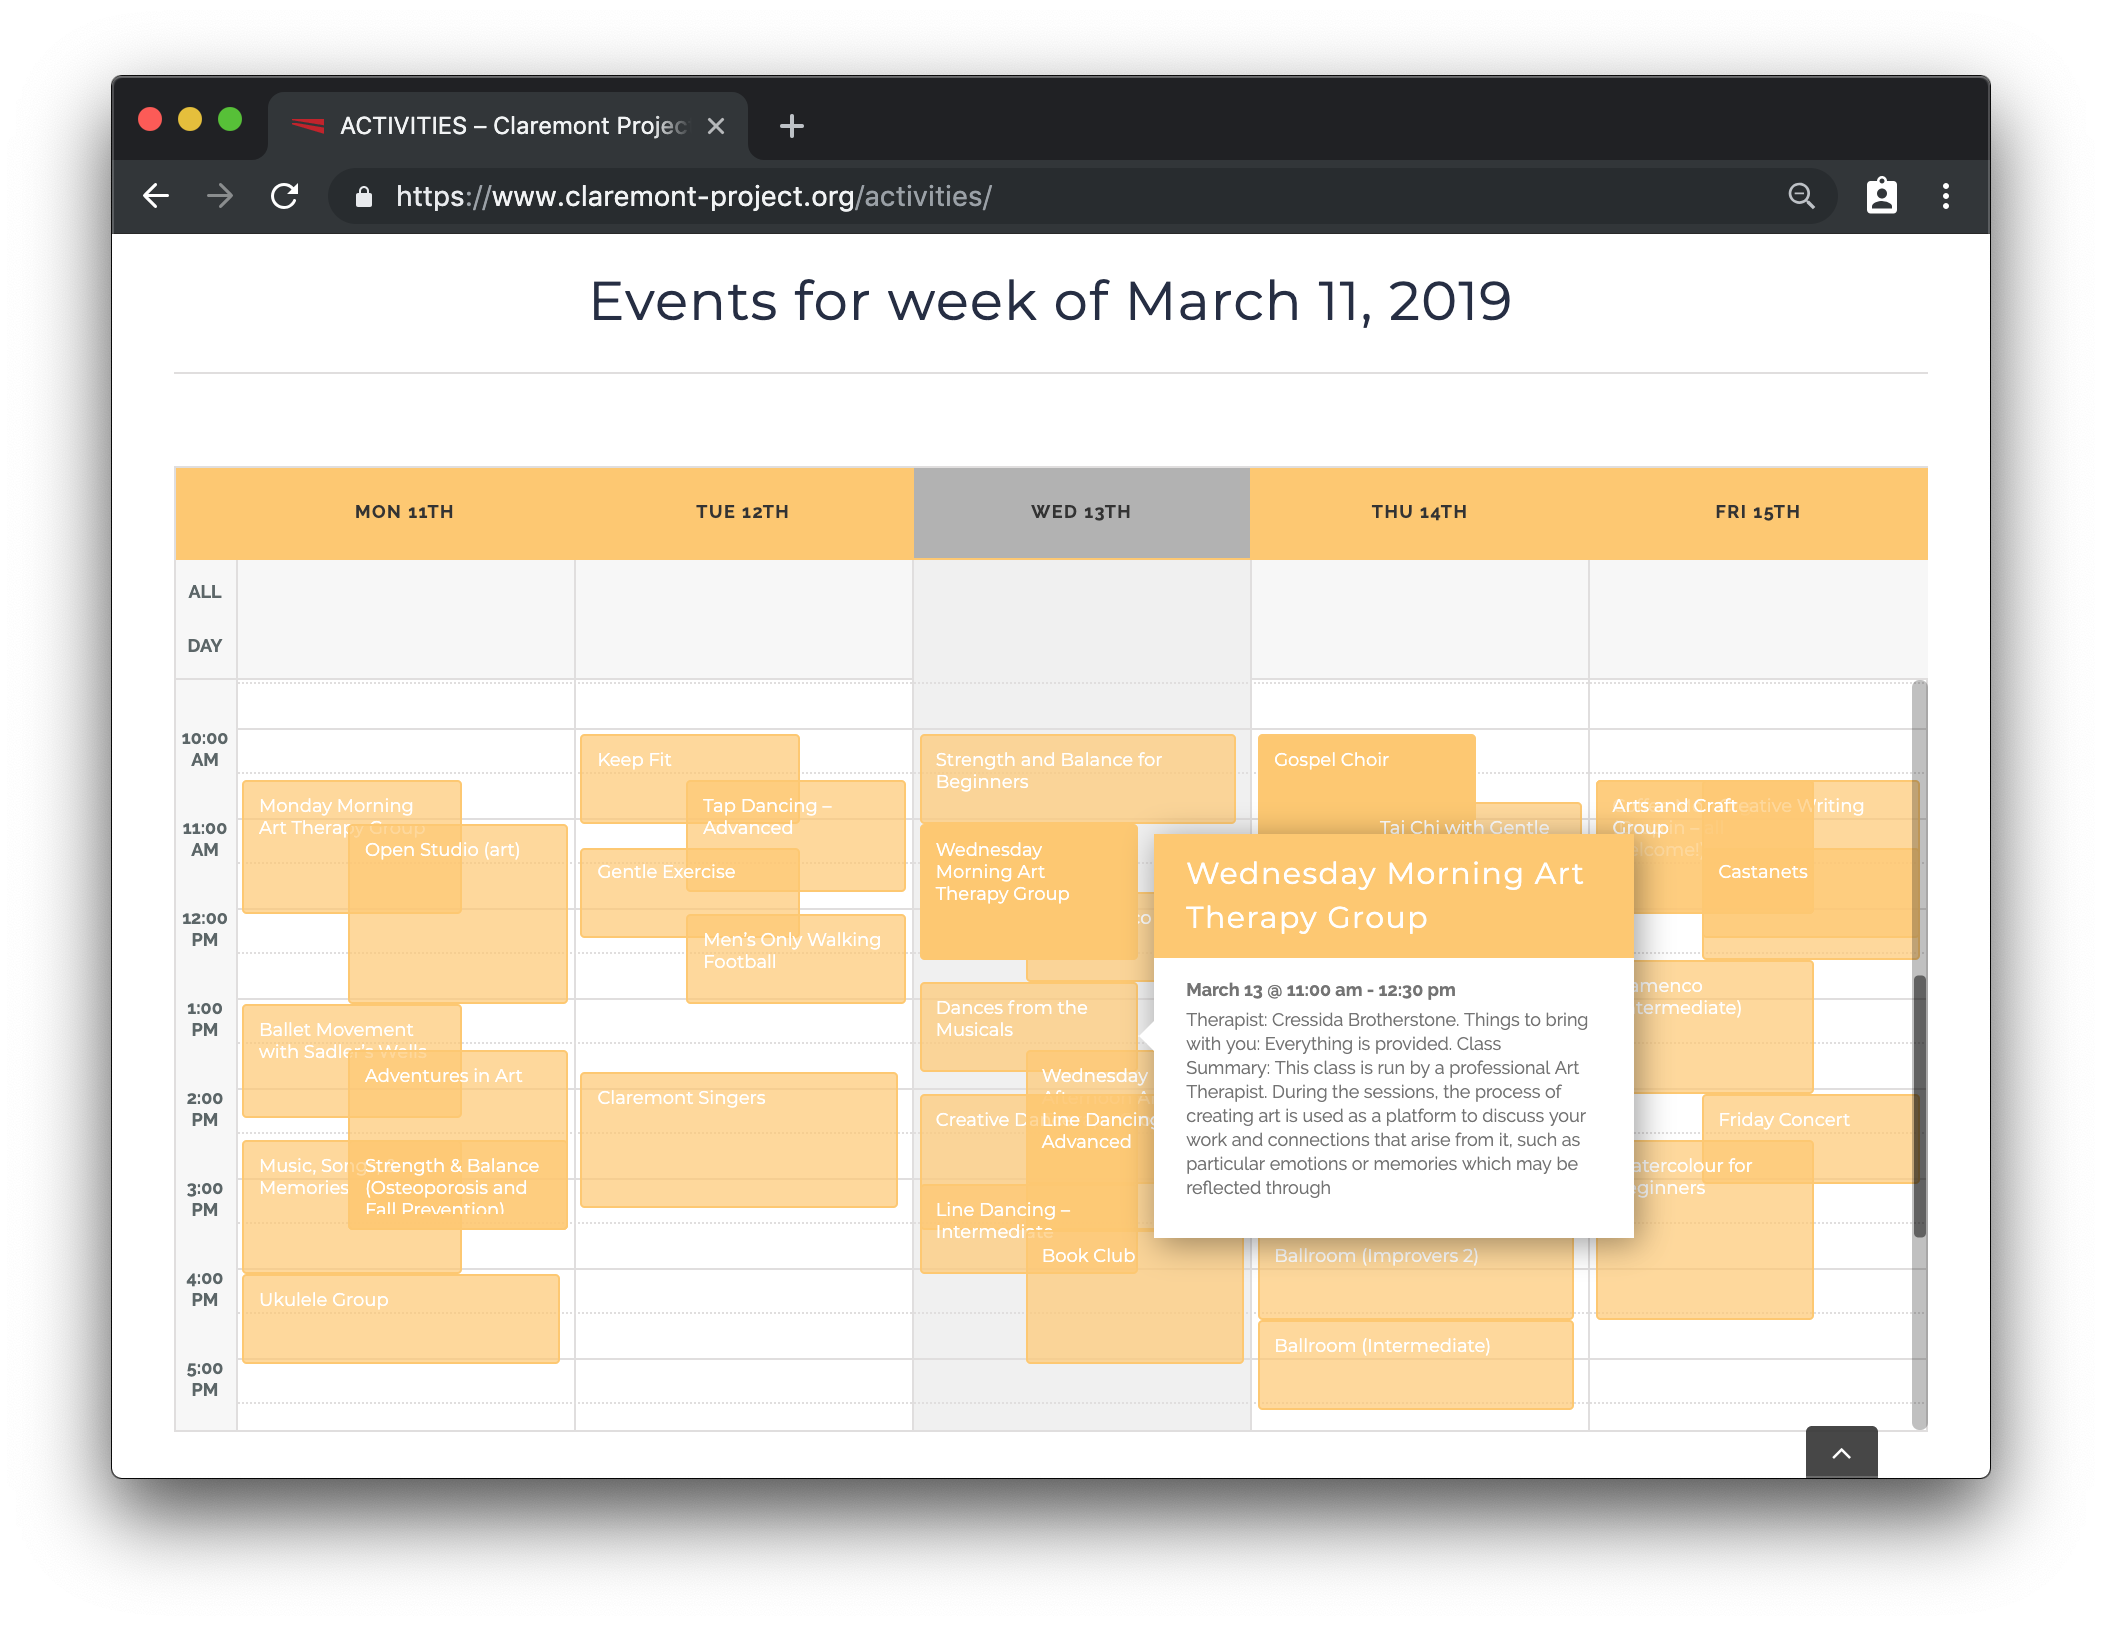 Another screenshot of the Clairemont Project's calendar week view showing a tooltip when the mouse cursor hovers over an event, displaying additional event details, including an excerpt of the event description.